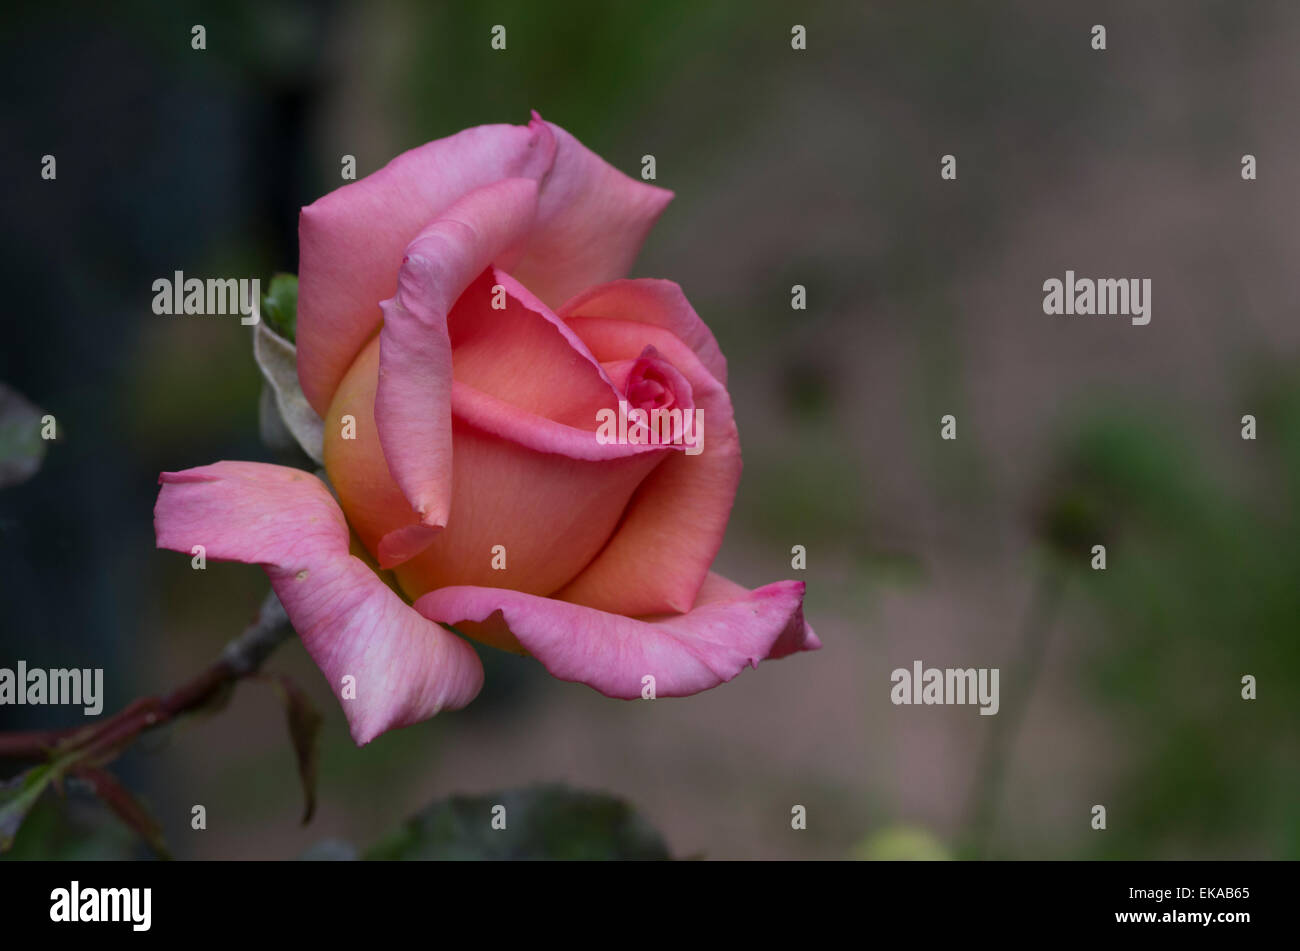 beautiful pinkish red rose against blurred background Stock Photo